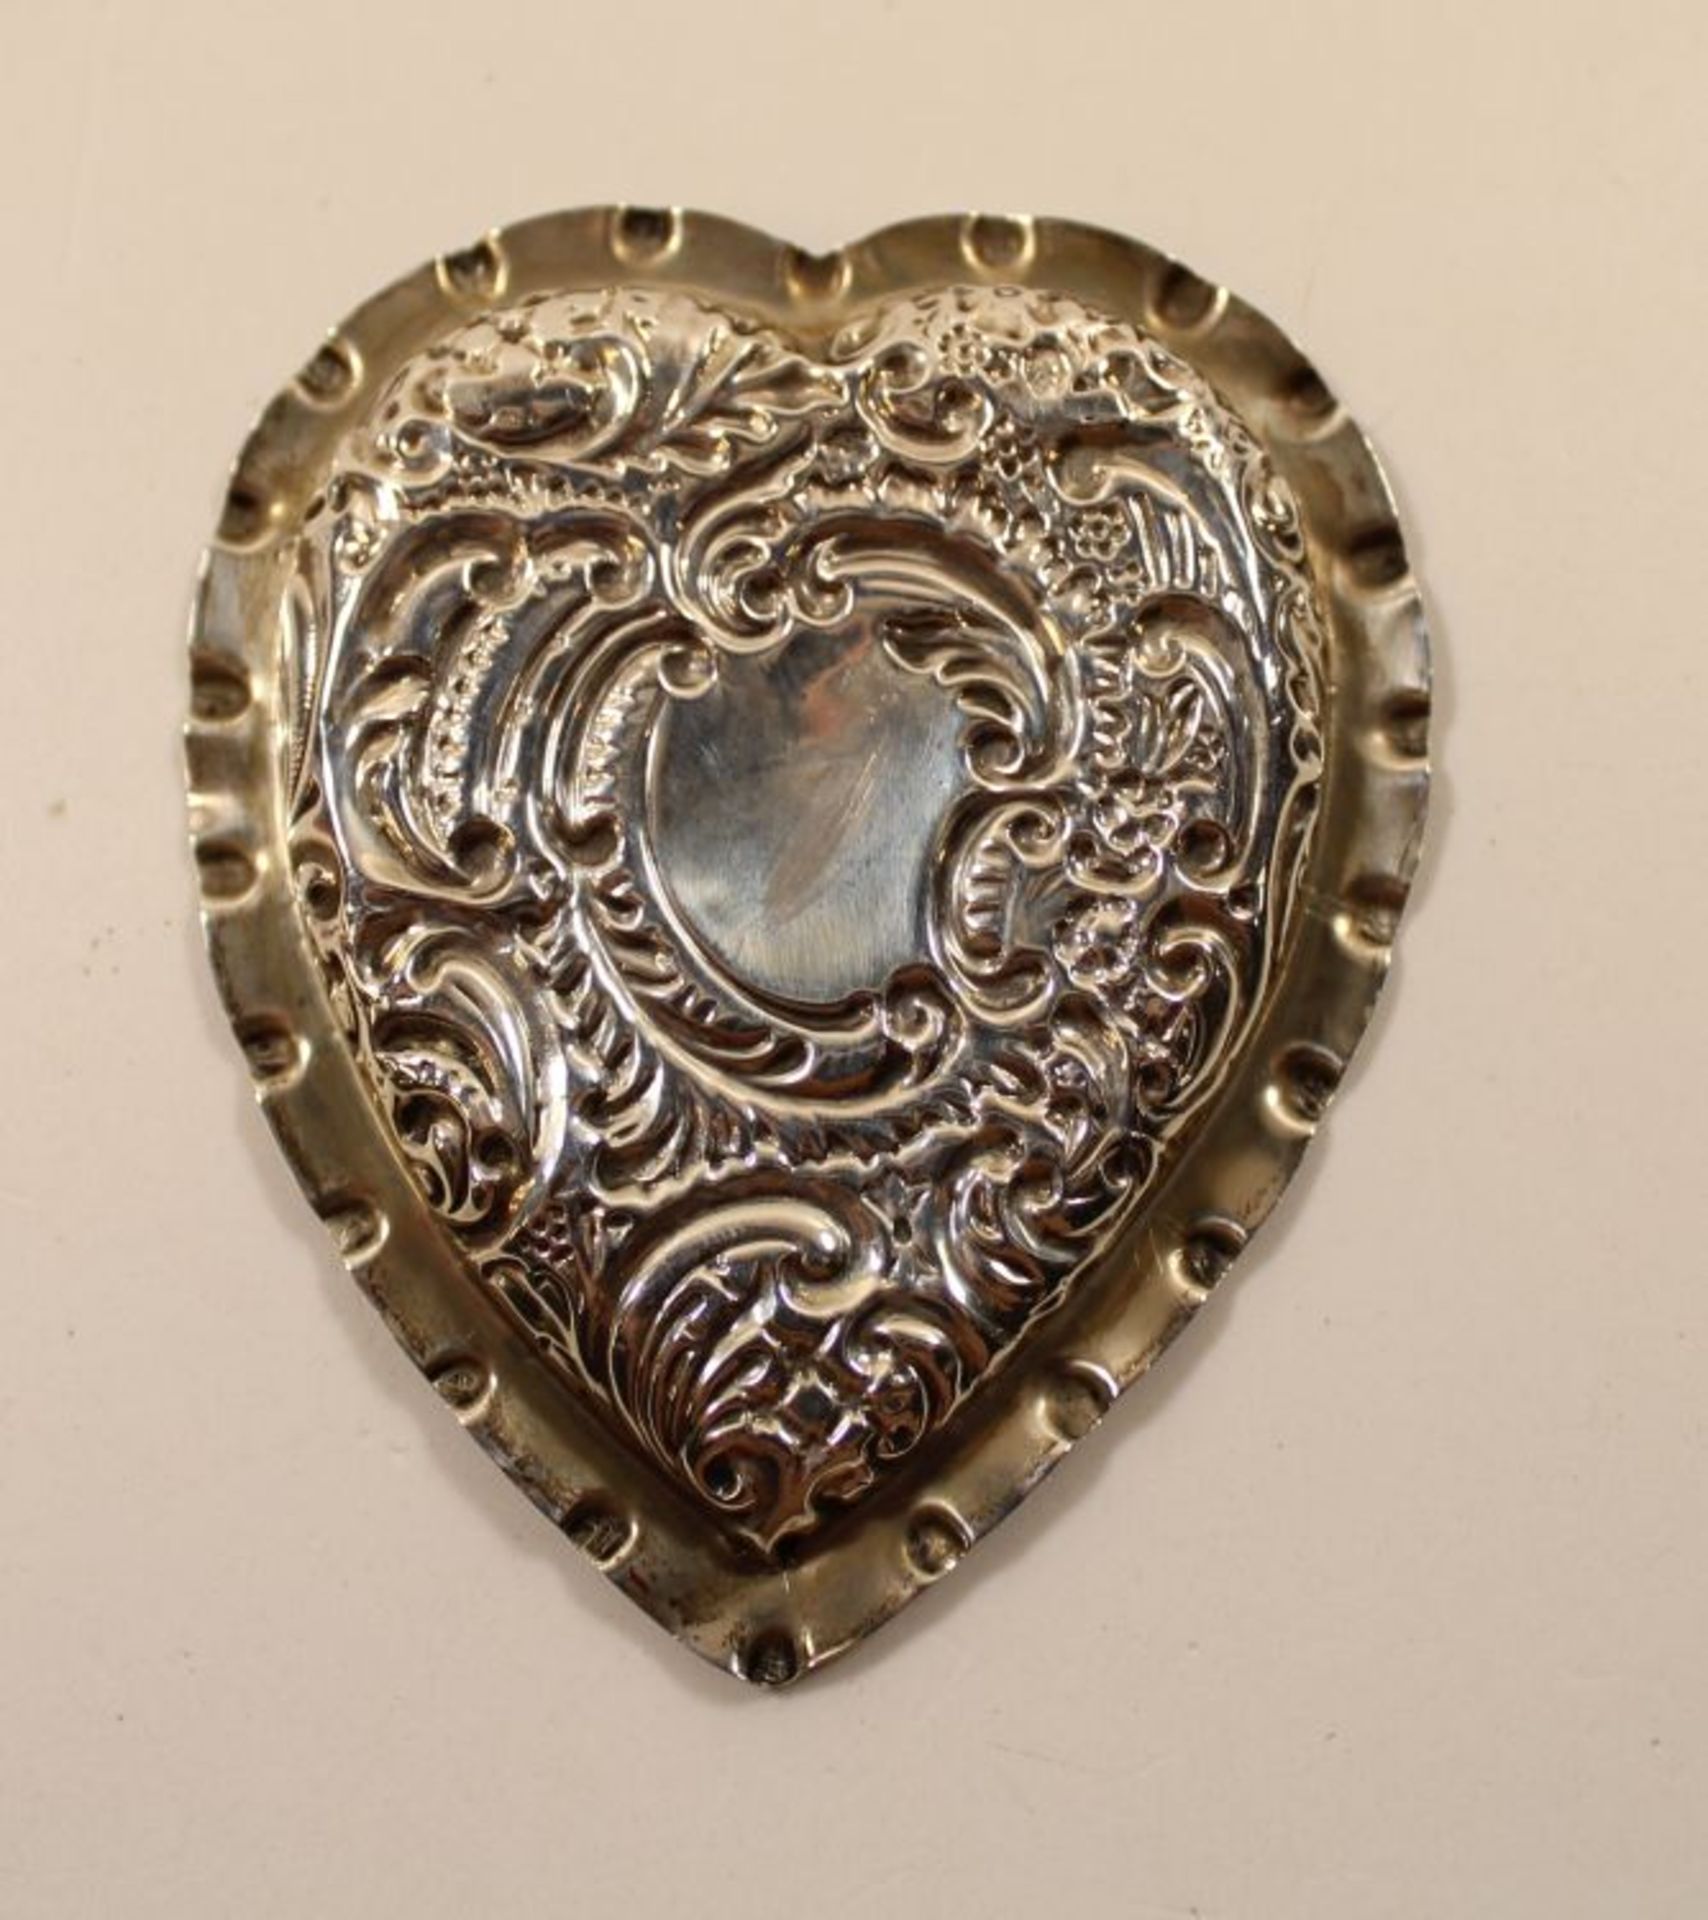 Antique Embossed Silver Heart shaped dish (chest 1896) (est £20-£40) - Image 2 of 2